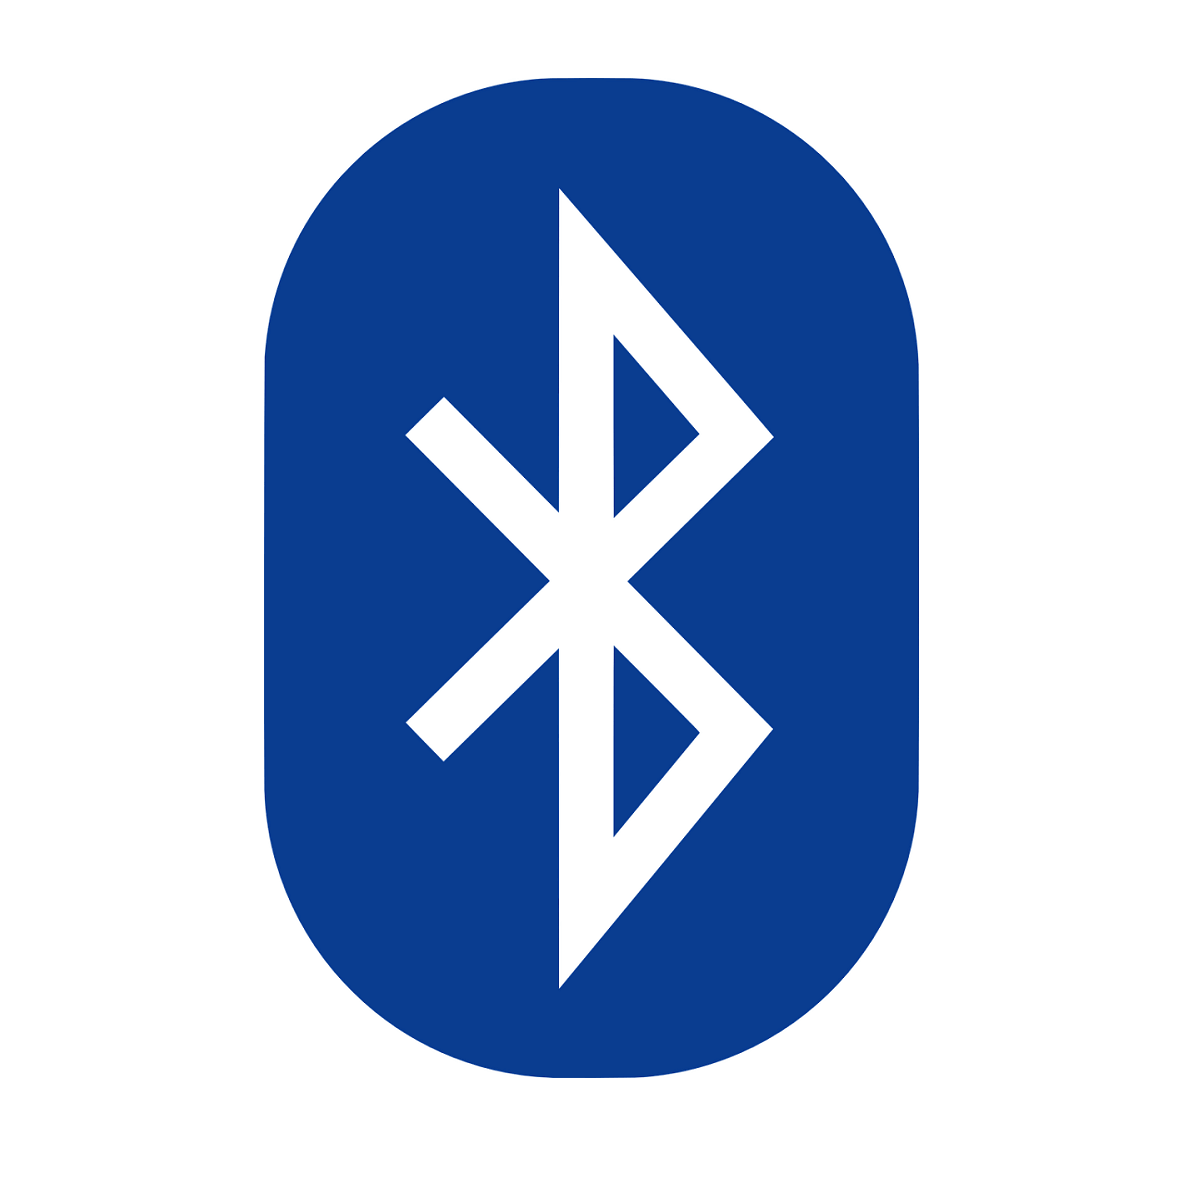 Windows was unable to install Bluetooth peripheral device